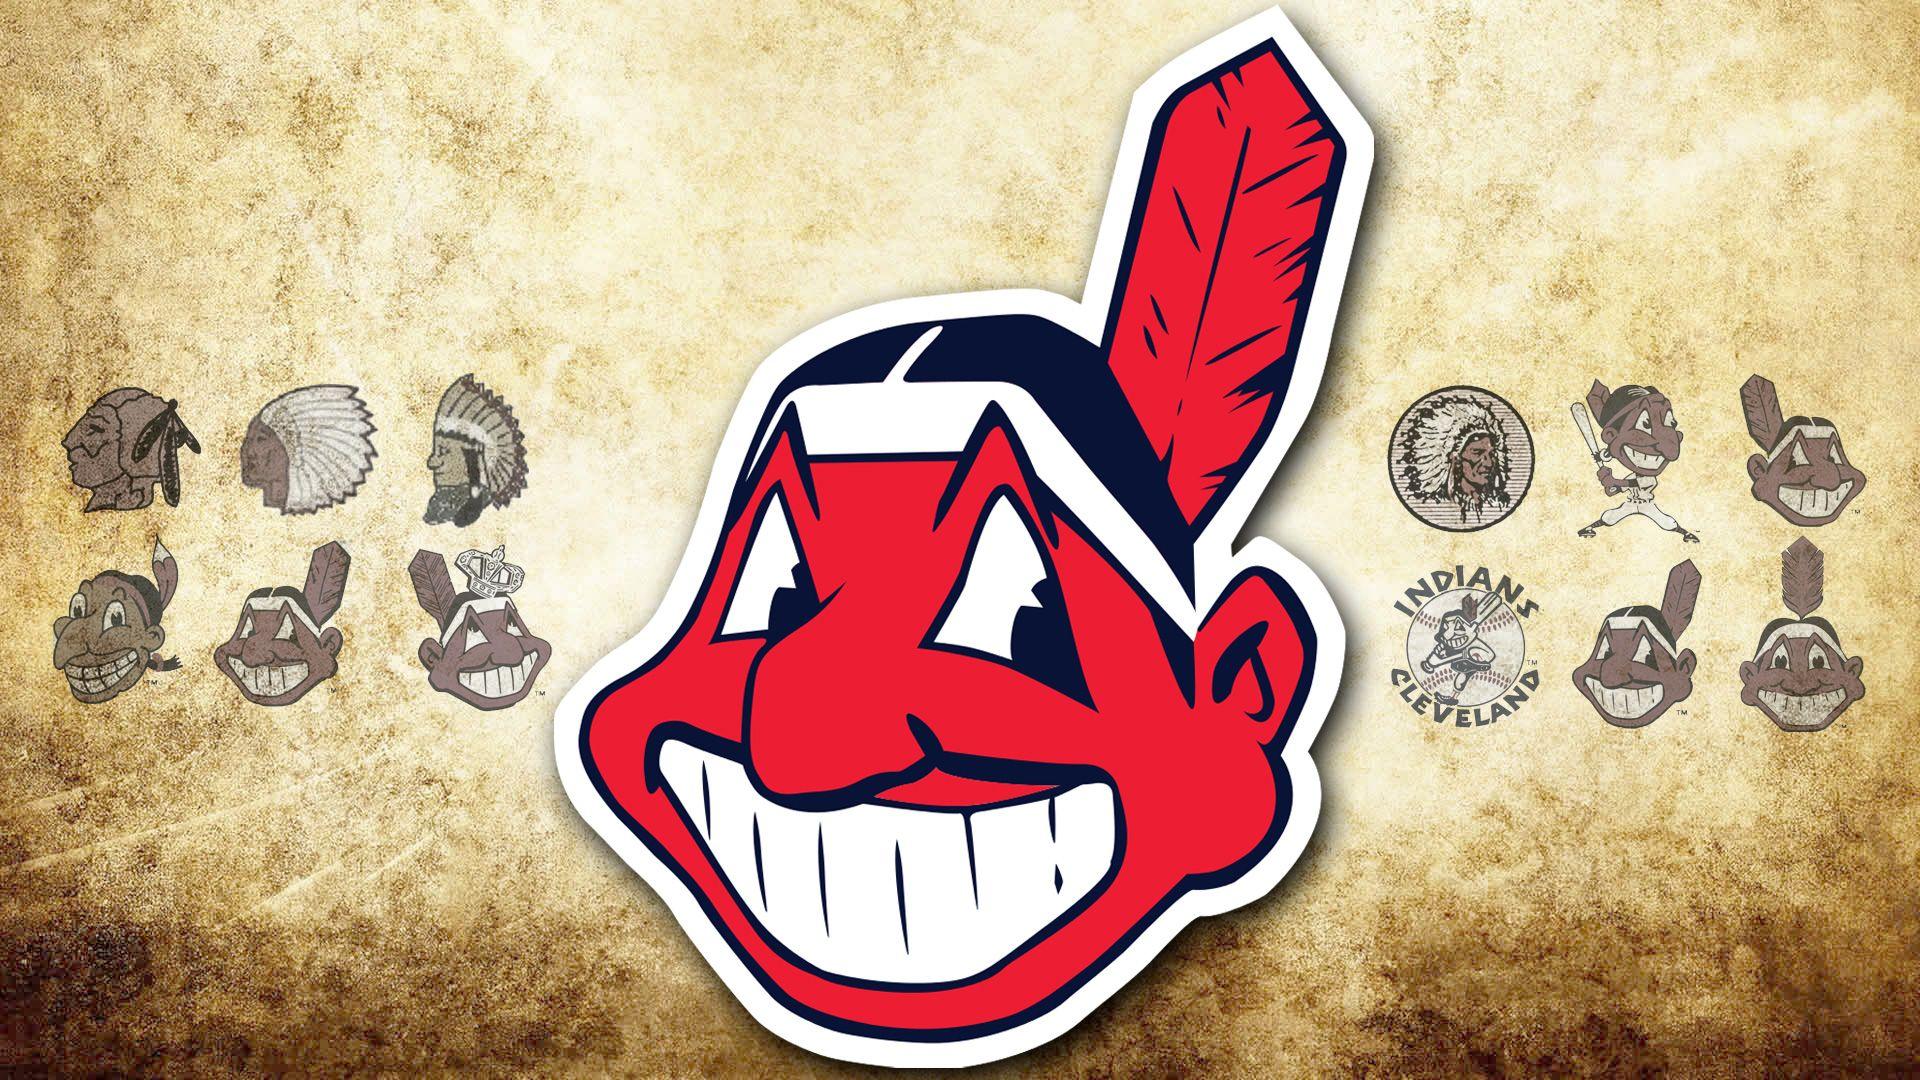 MLB Indians Logo - Indians should quit hedging, retire Chief Wahoo completely | MLB ...